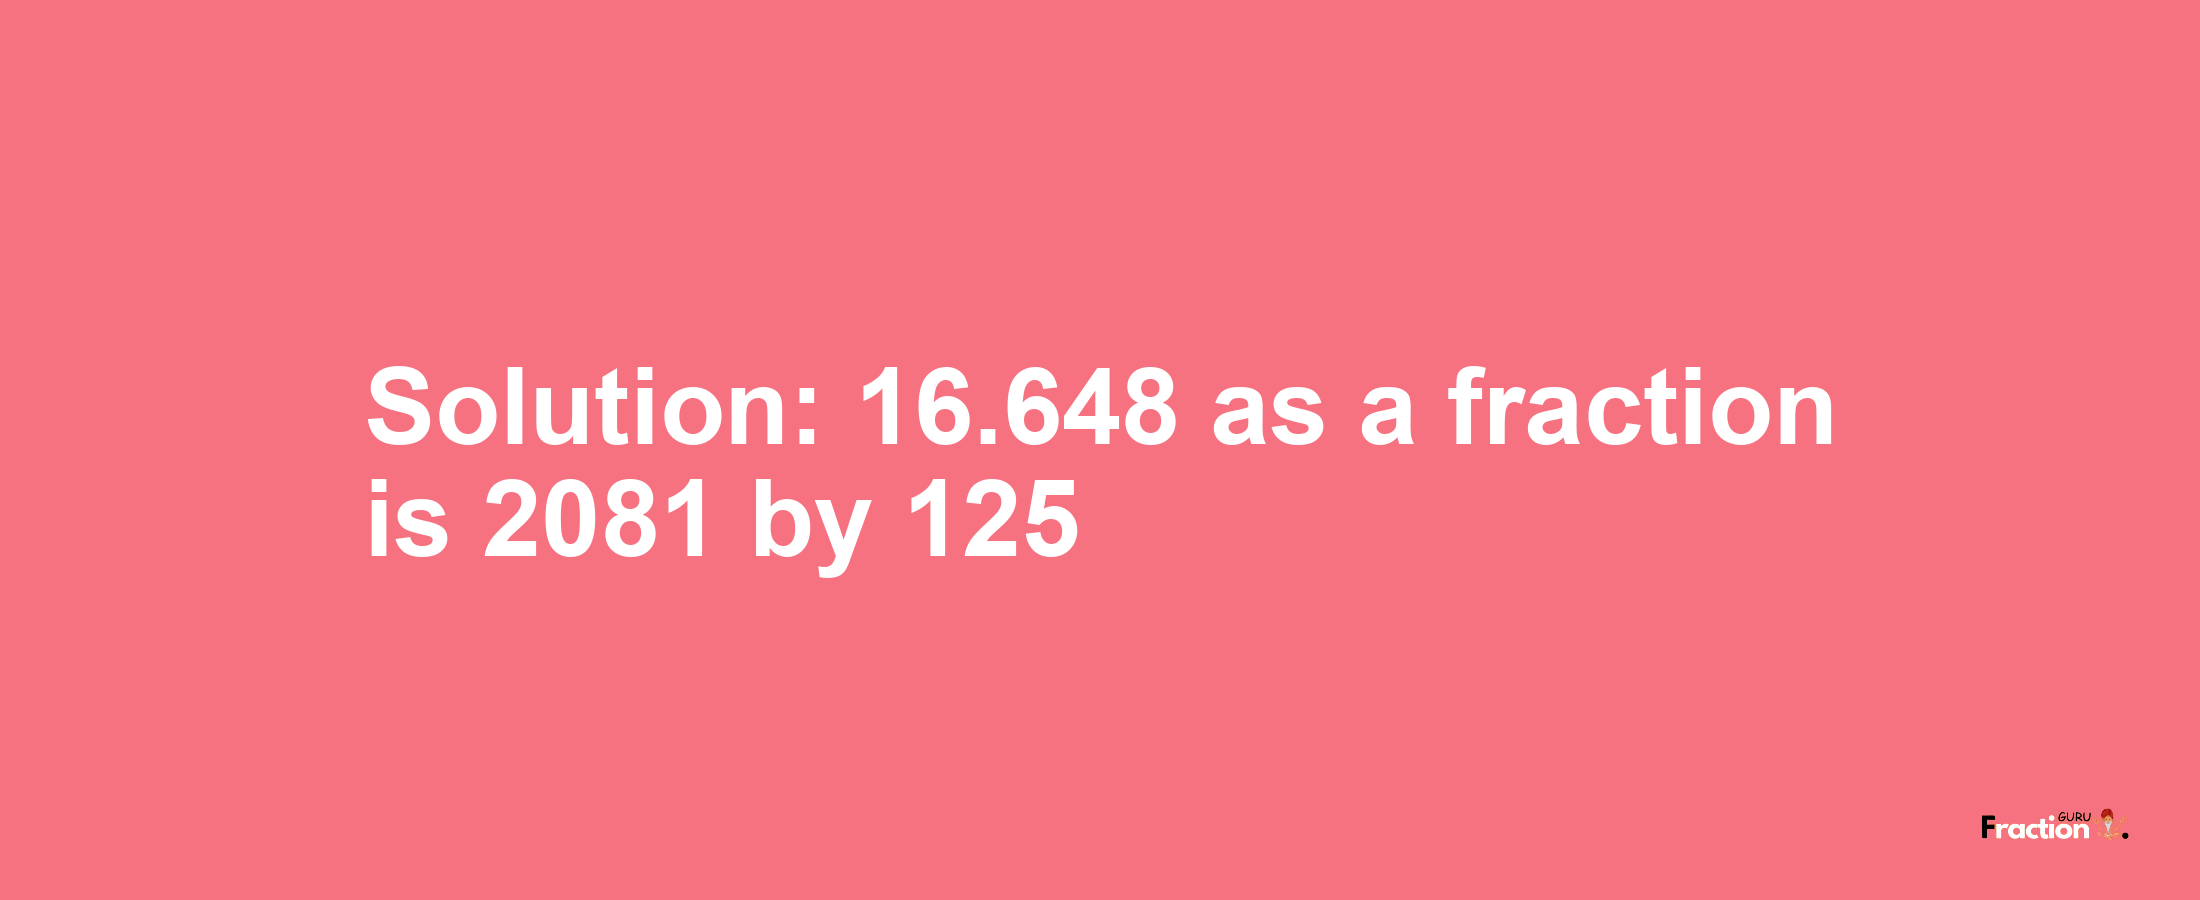 Solution:16.648 as a fraction is 2081/125